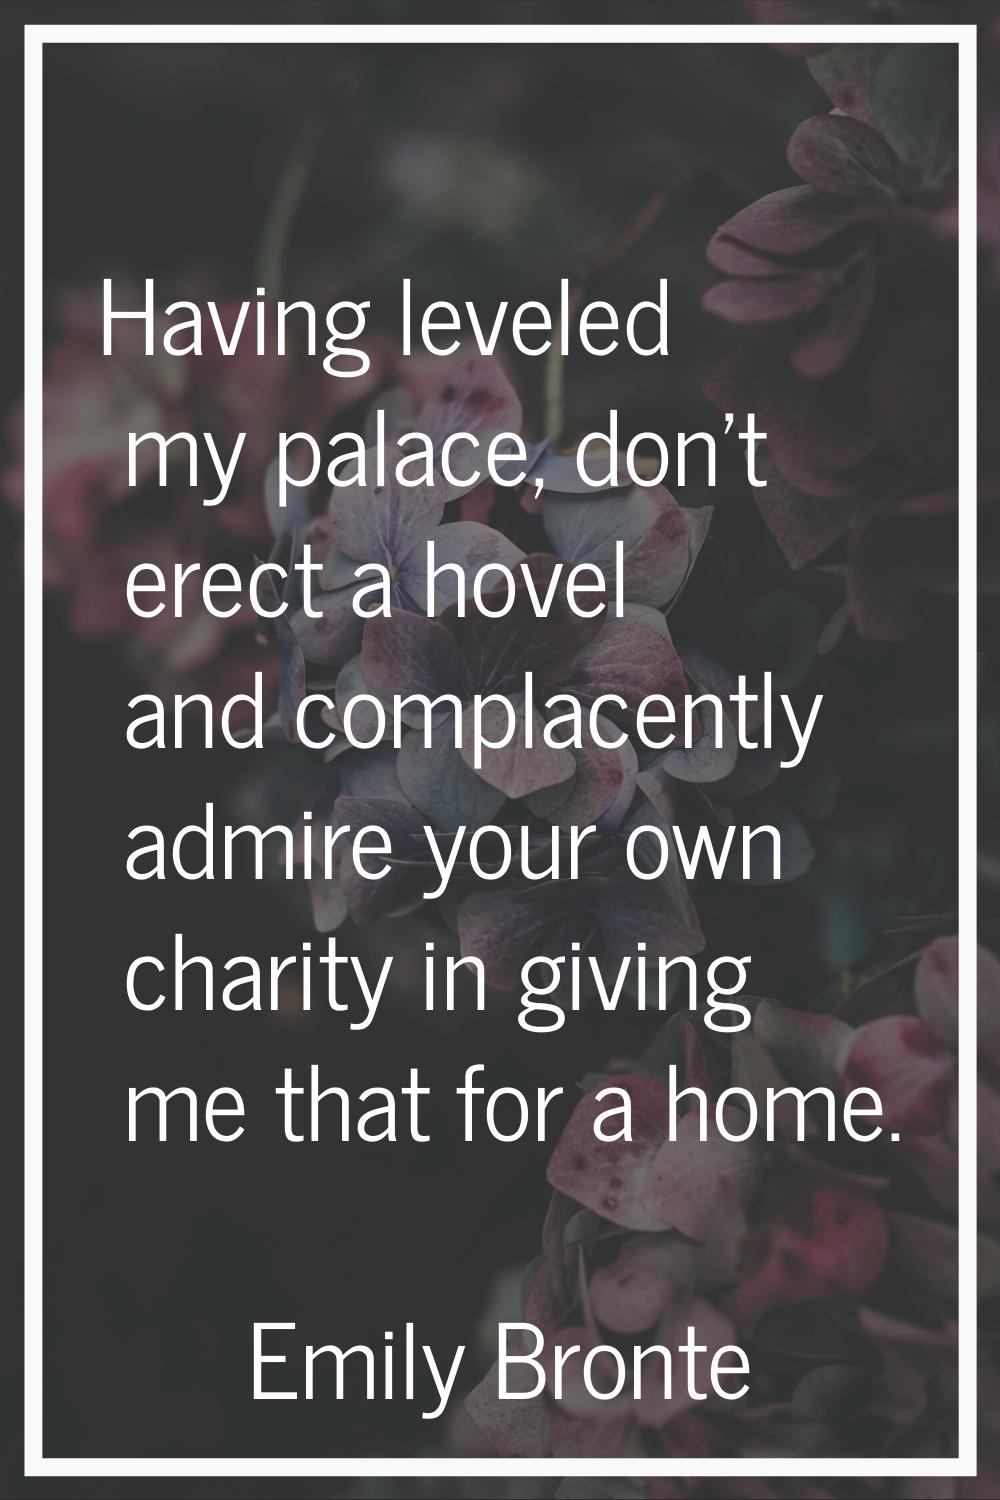 Having leveled my palace, don't erect a hovel and complacently admire your own charity in giving me